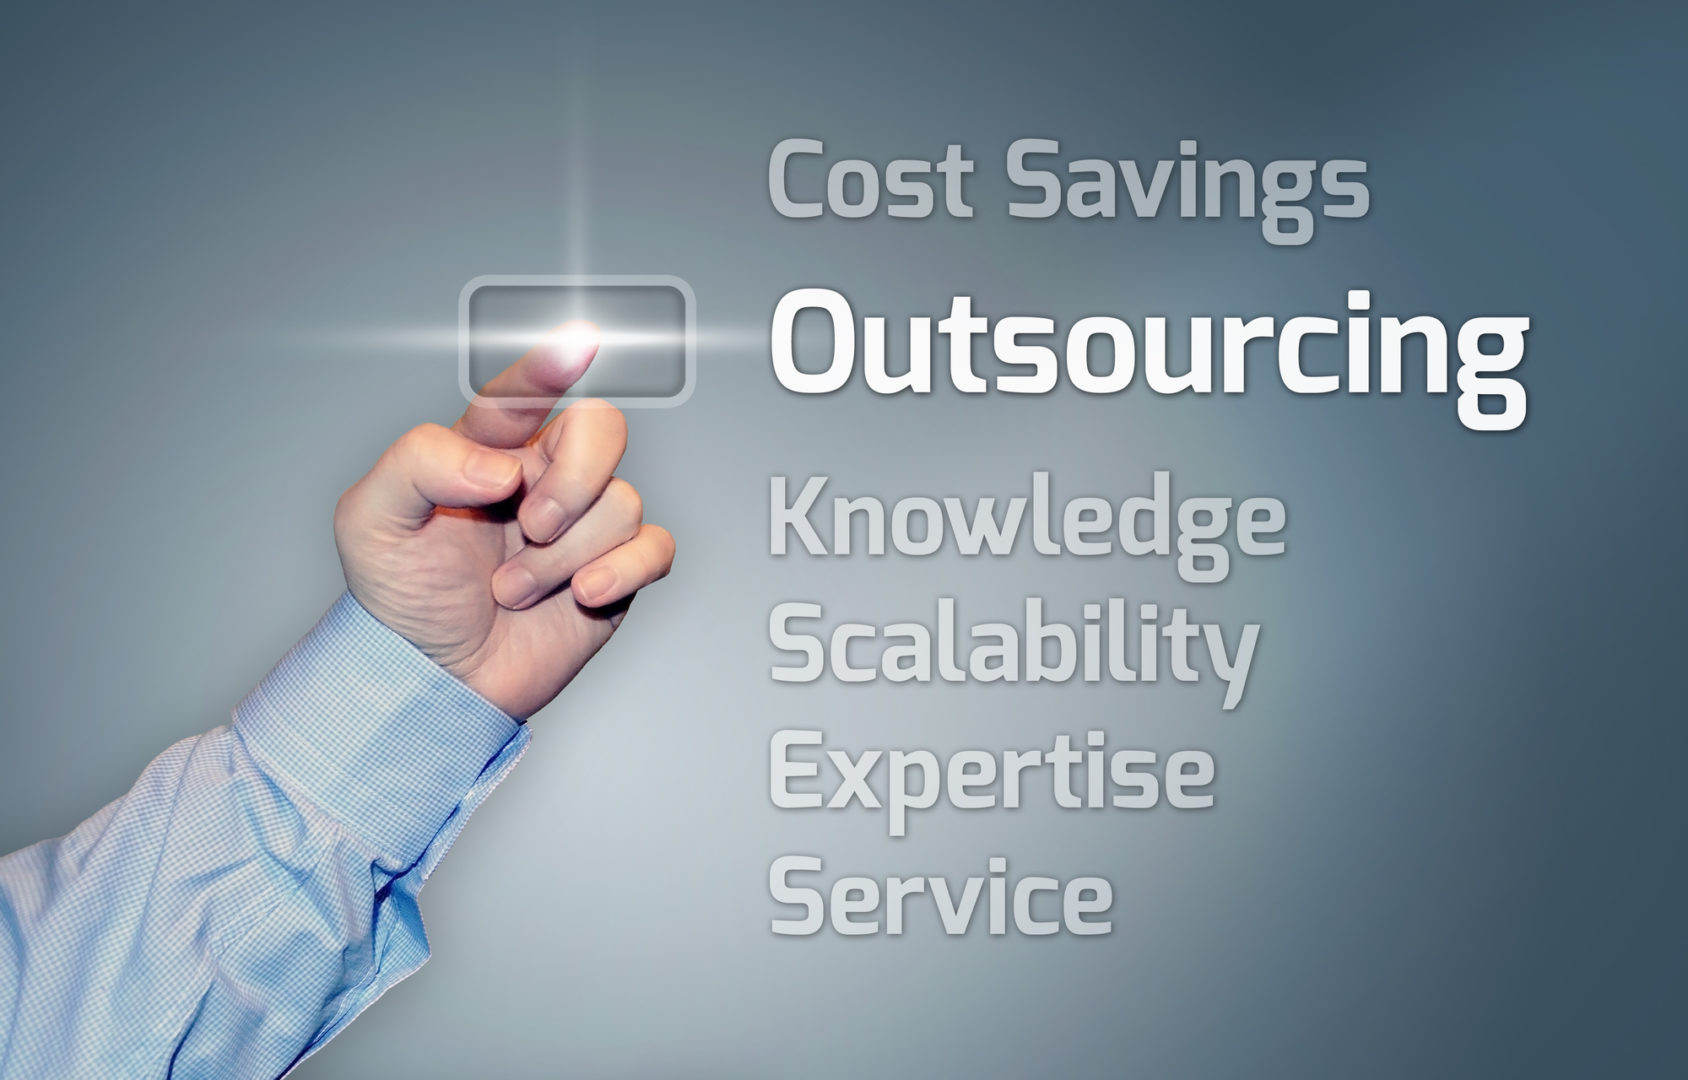 why do companies outsource